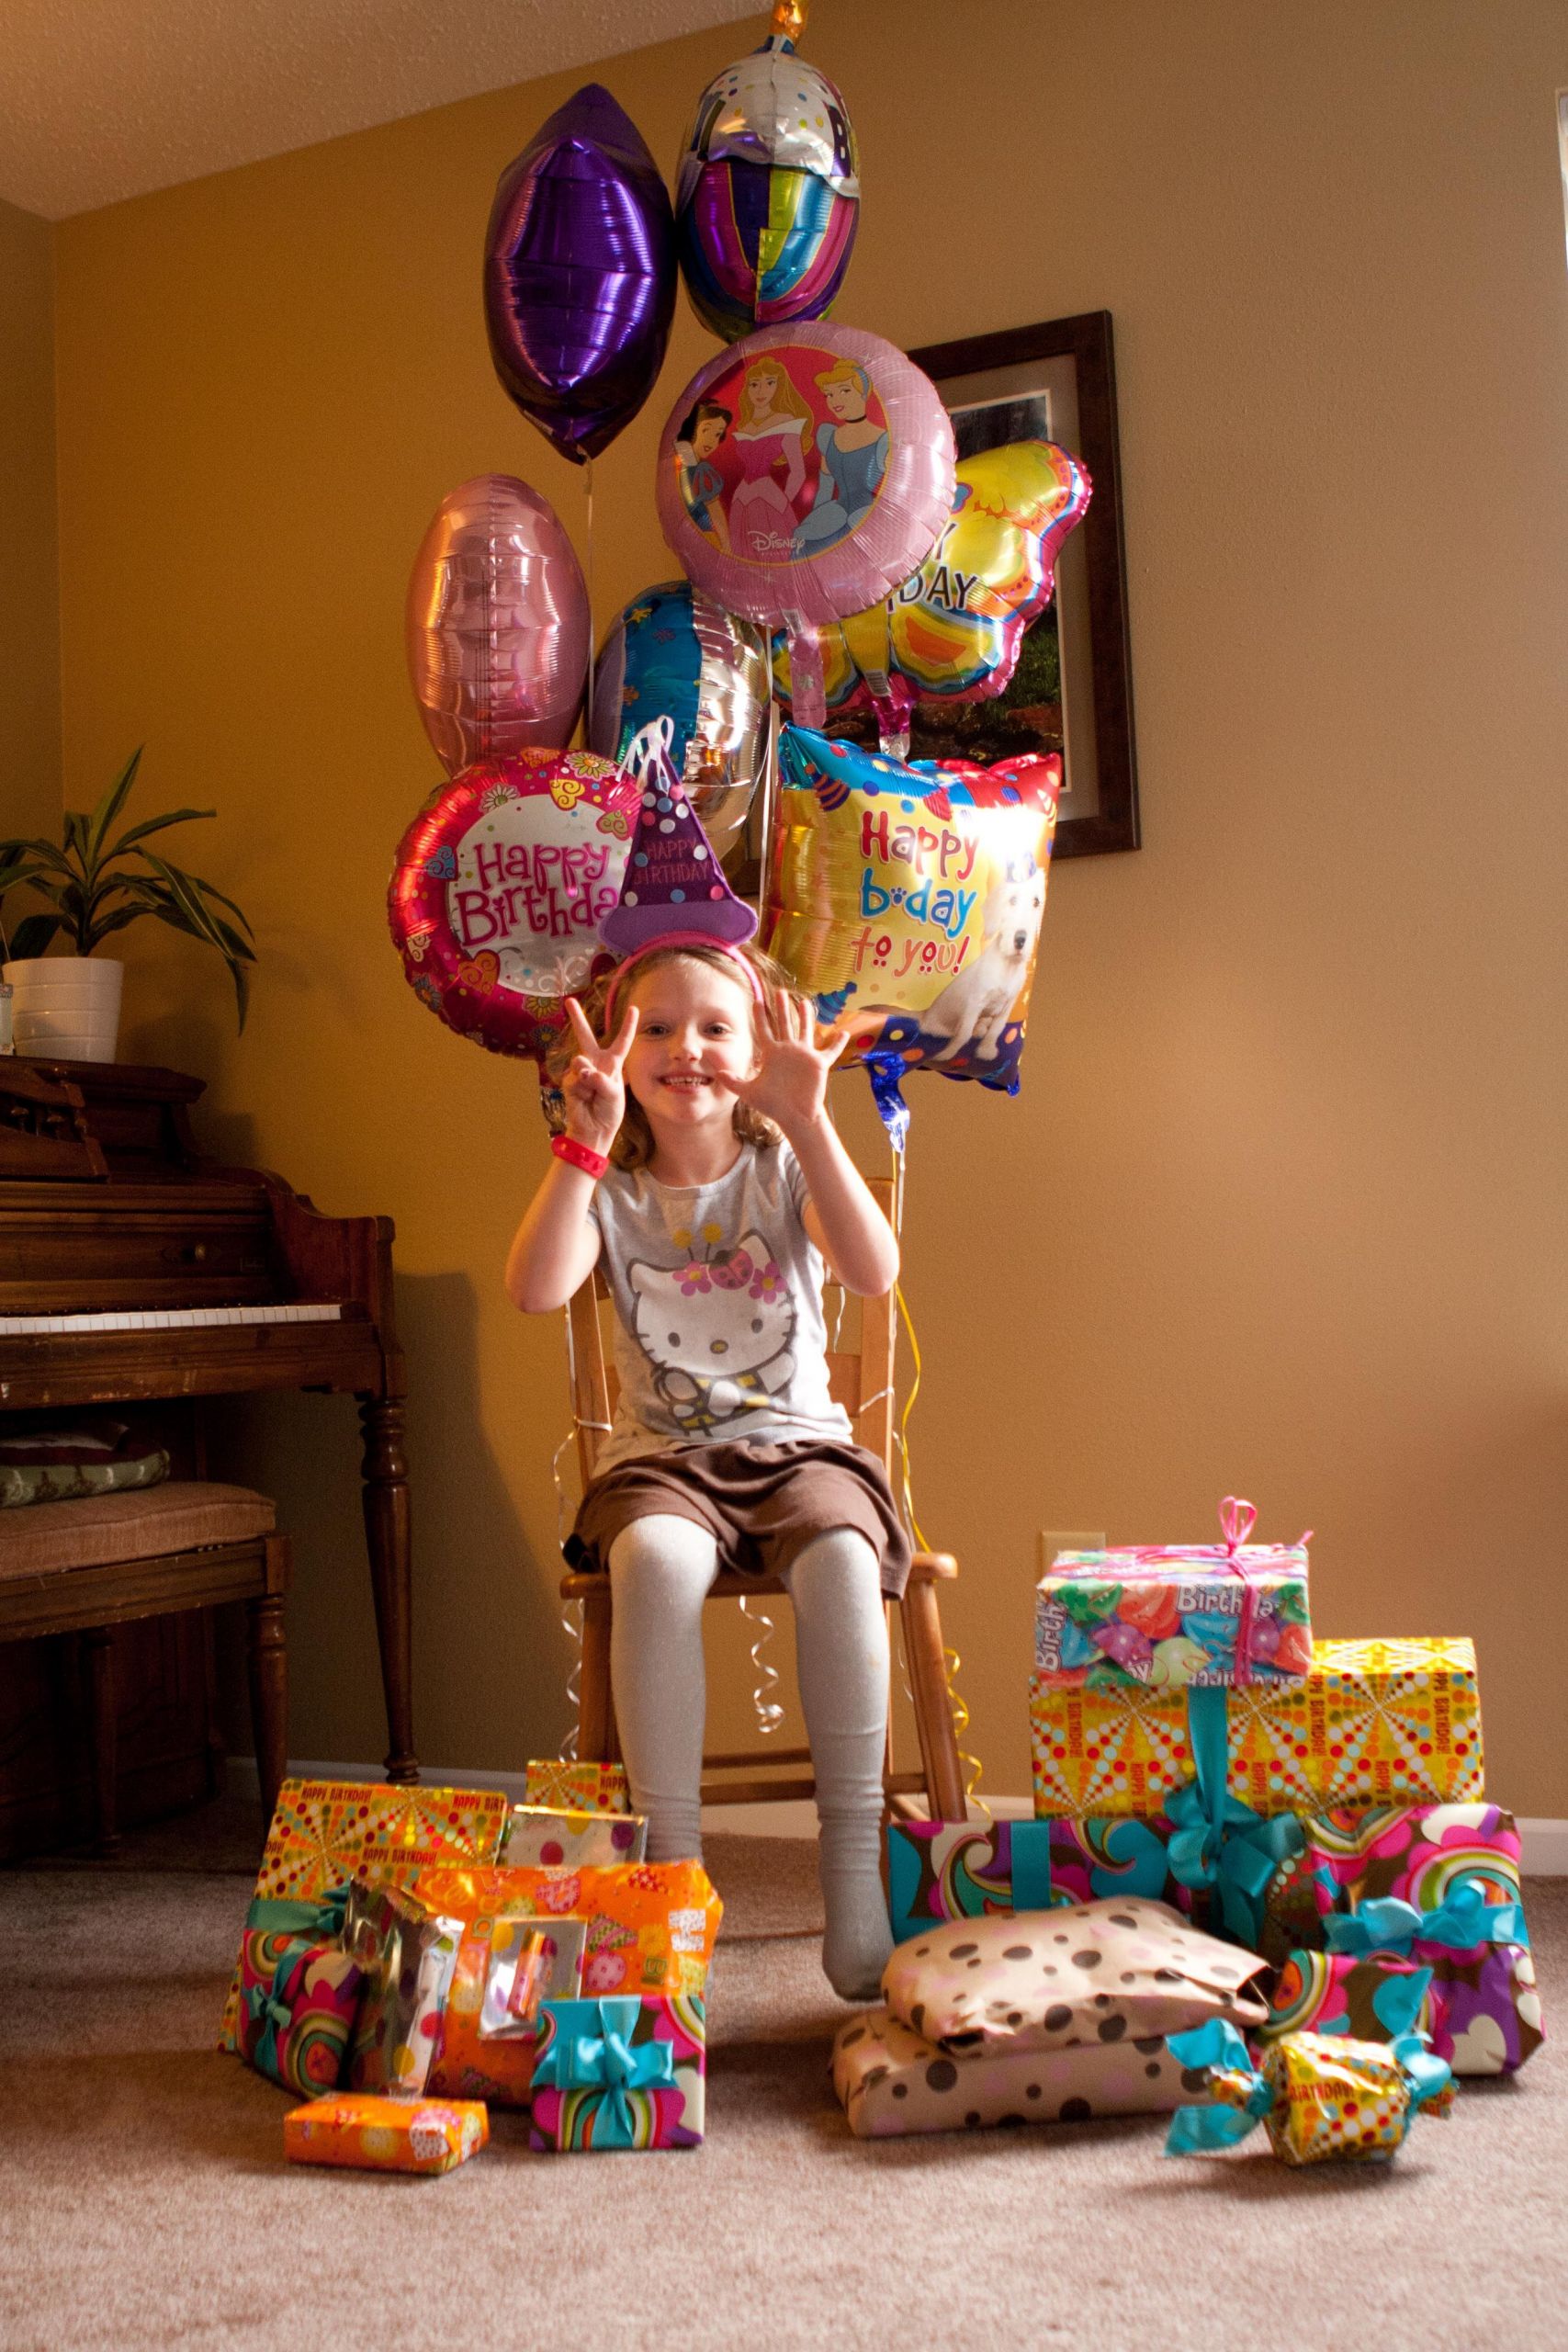 December Birthday Party Ideas
 12 ways to keep a December birthday separate from